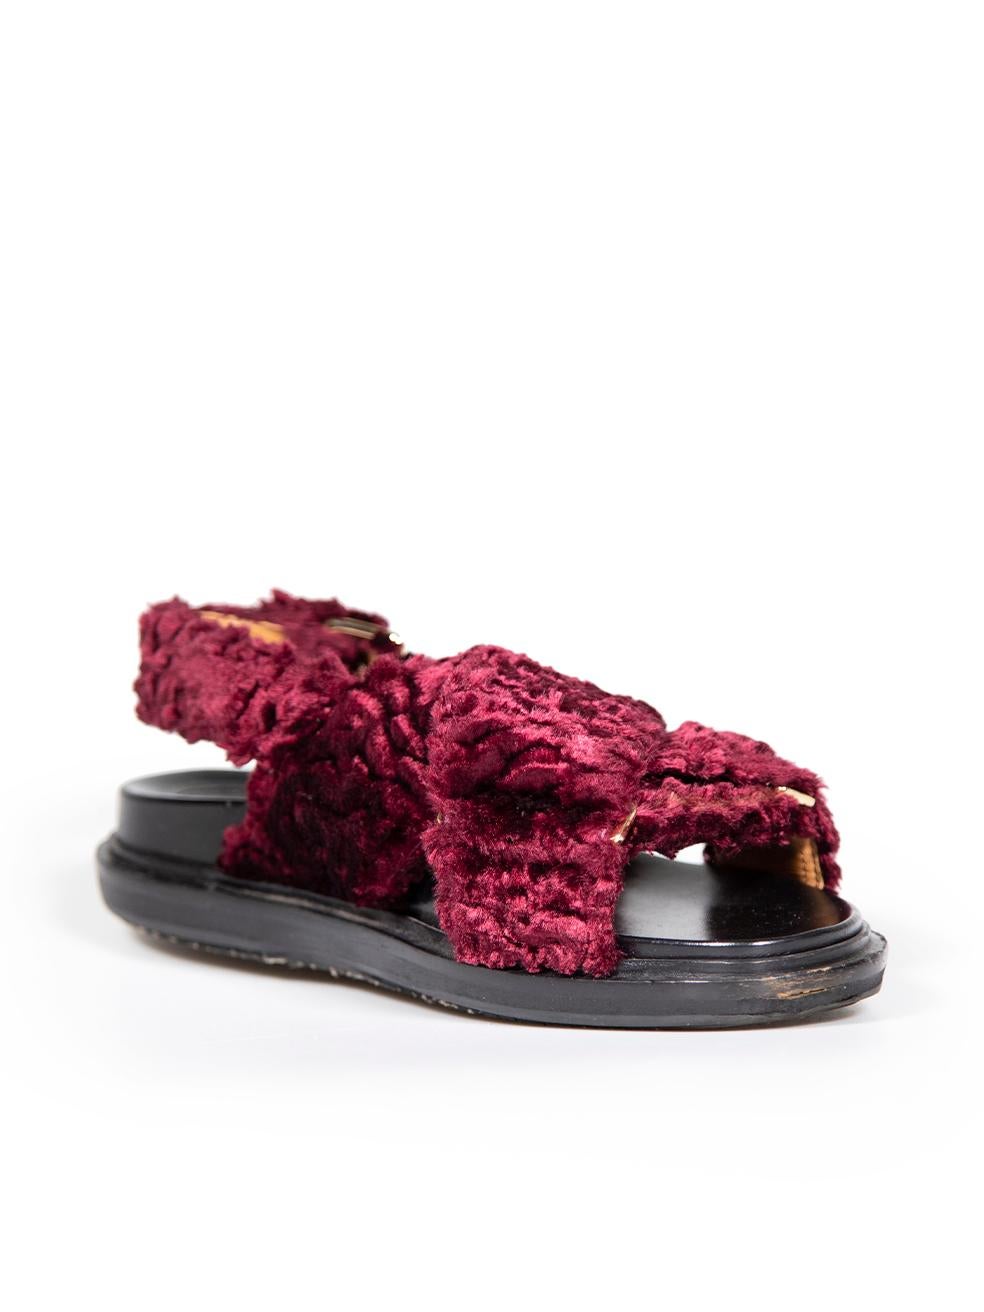 CONDITION is Very good. Minimal wear to sandals is evident. Minimal wear to both shoe straps with missing patches of fur on this used Marni designer resale item.
 
 Details
 Fussbett
 Burgundy
 Faux shearling
 Slides
 Buckle ankle strap
 Open toe
 
